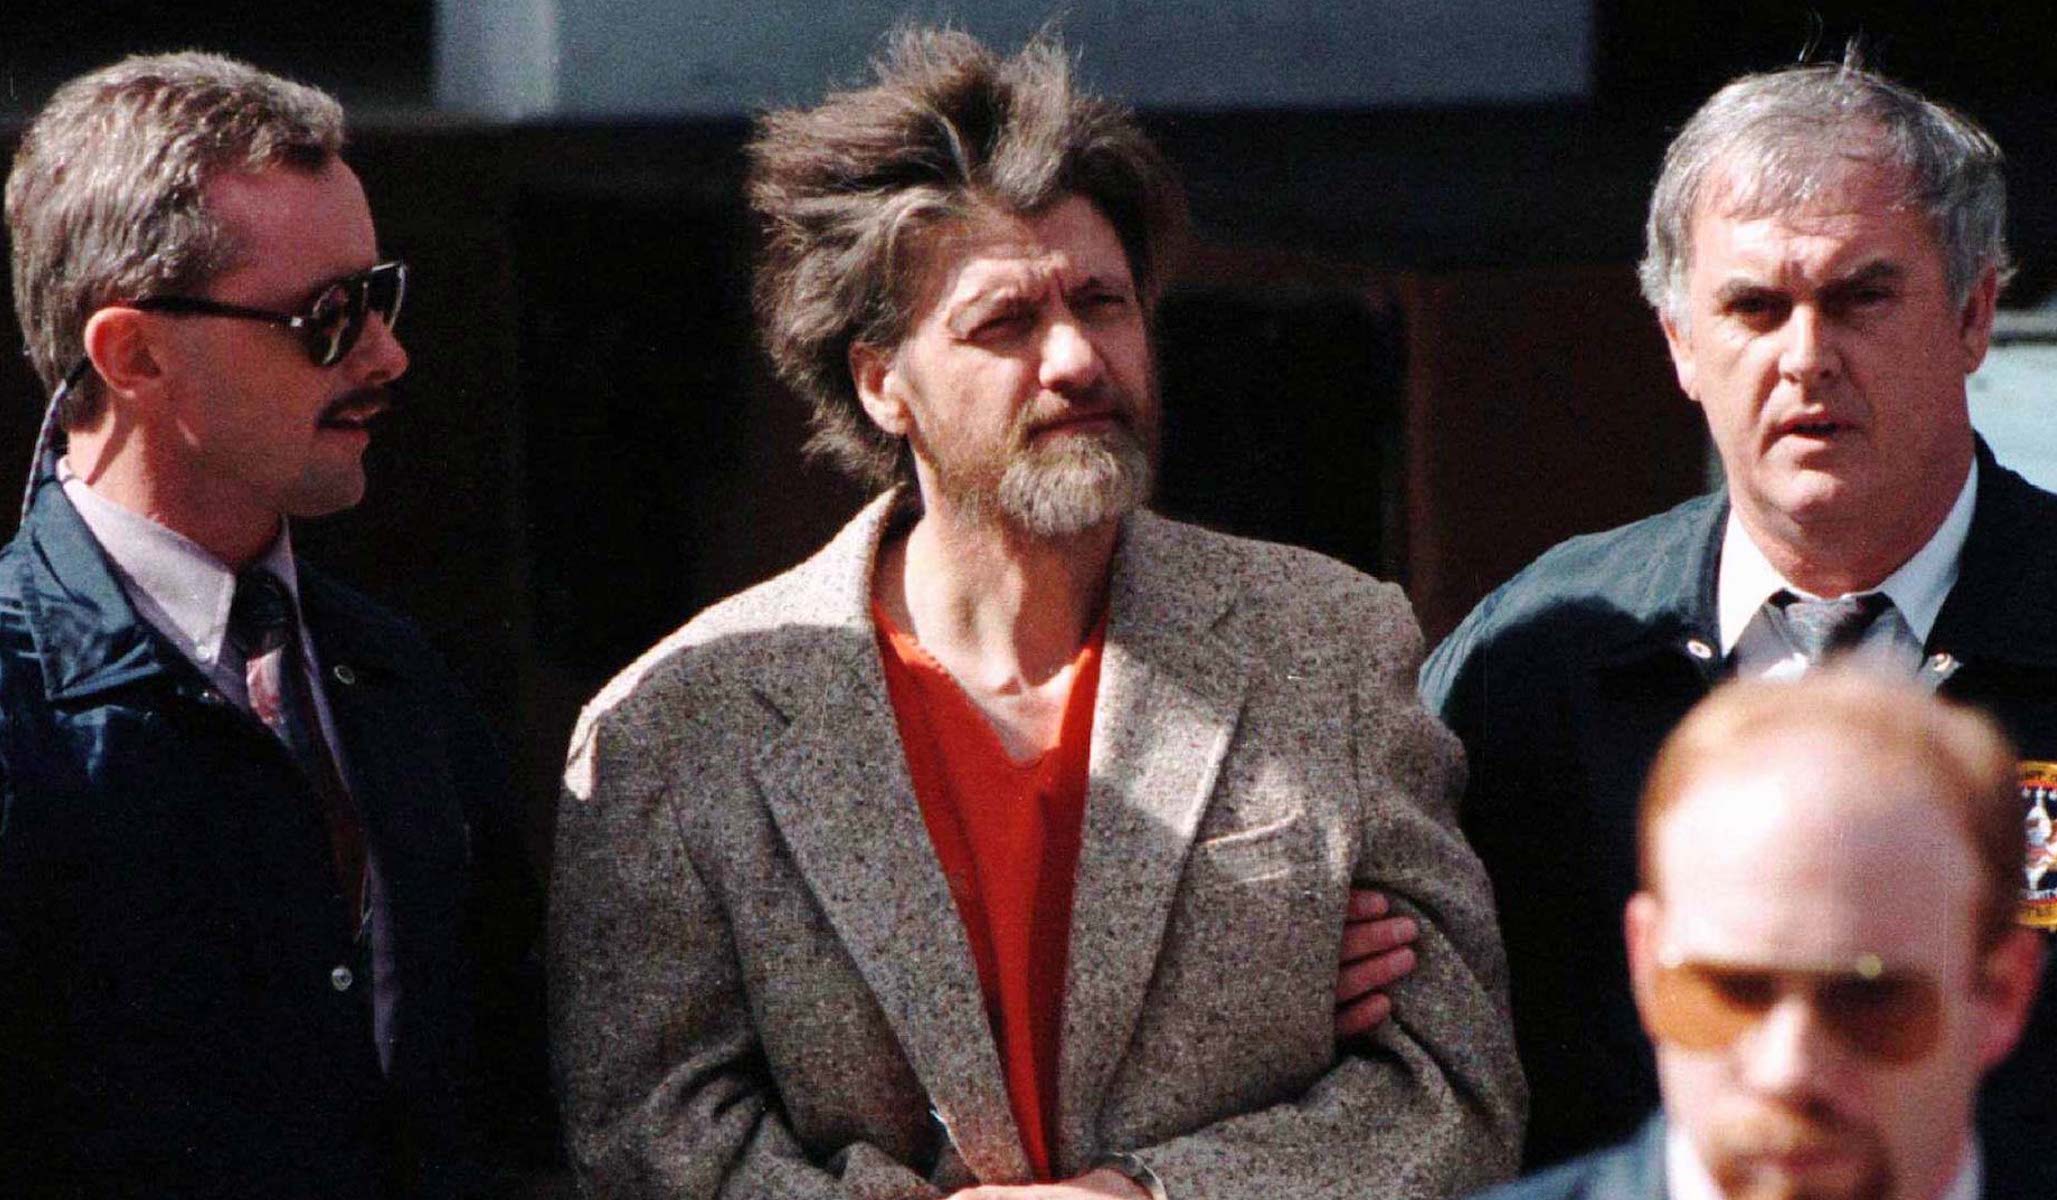 NextImg:Ted Kaczynski, Known as the ‘Unabomber,’ Dies in Federal Prison 